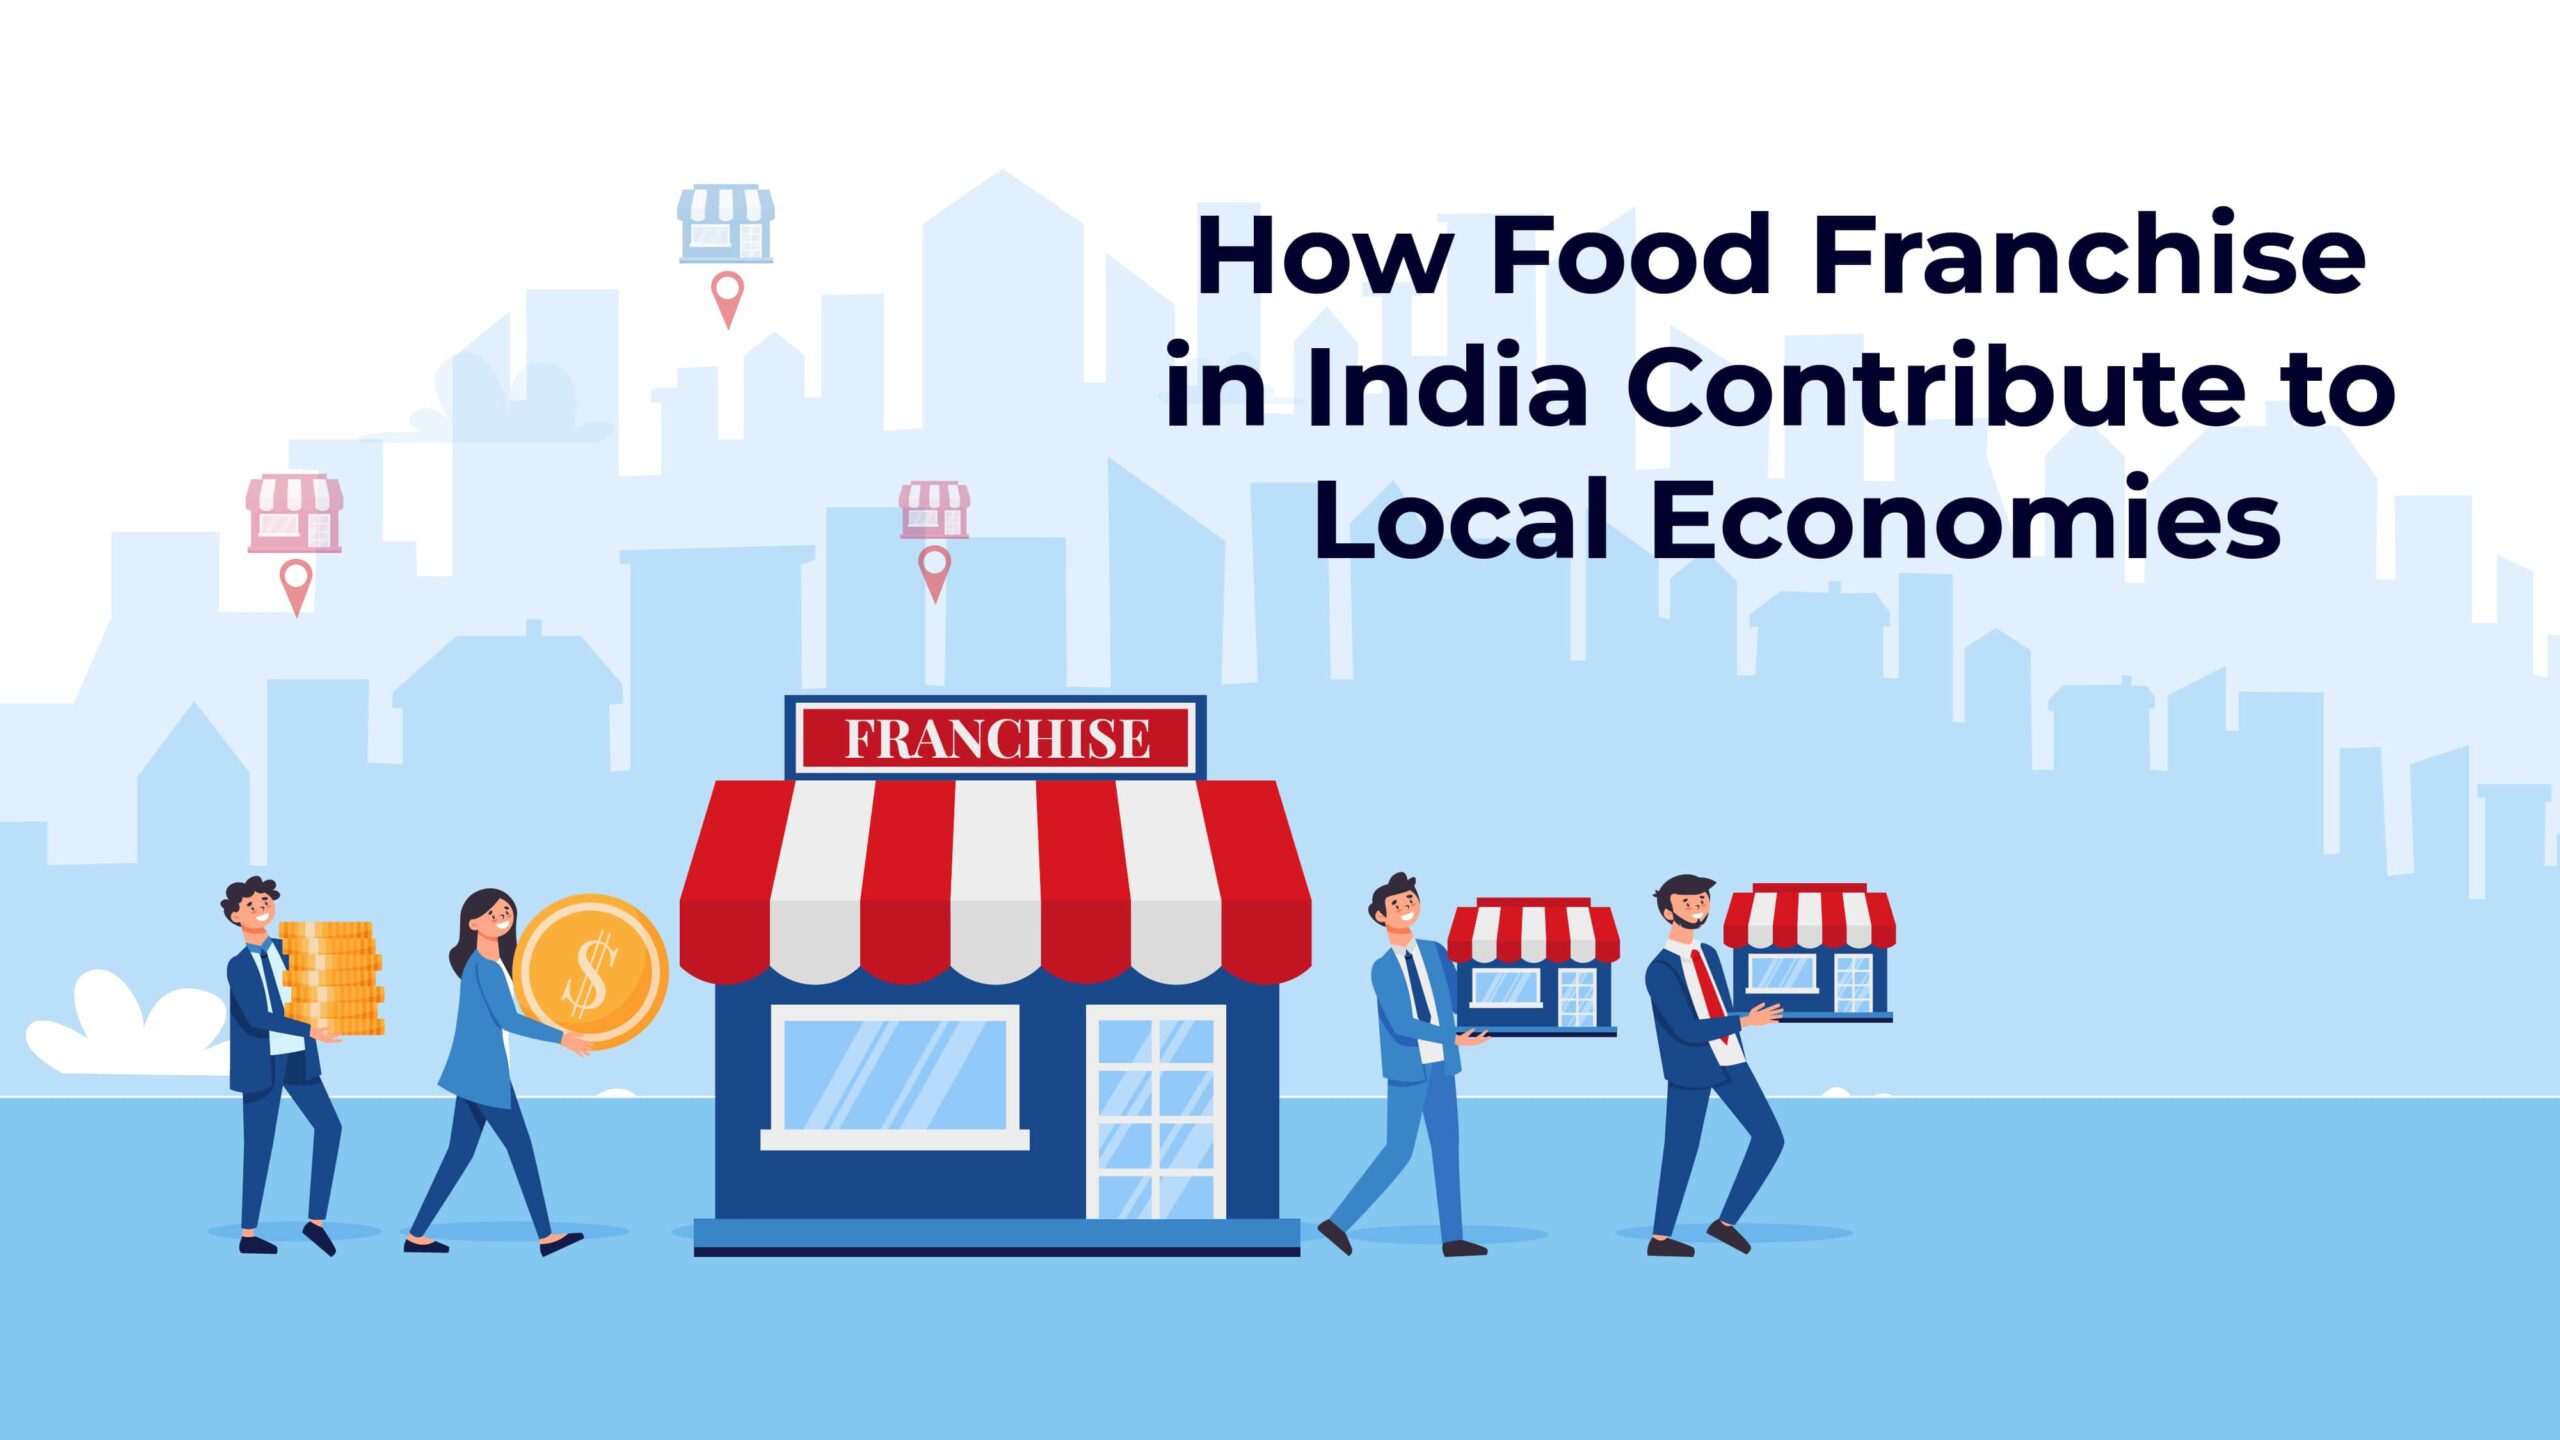 How Food Franchise in India Contribute to Local Economies